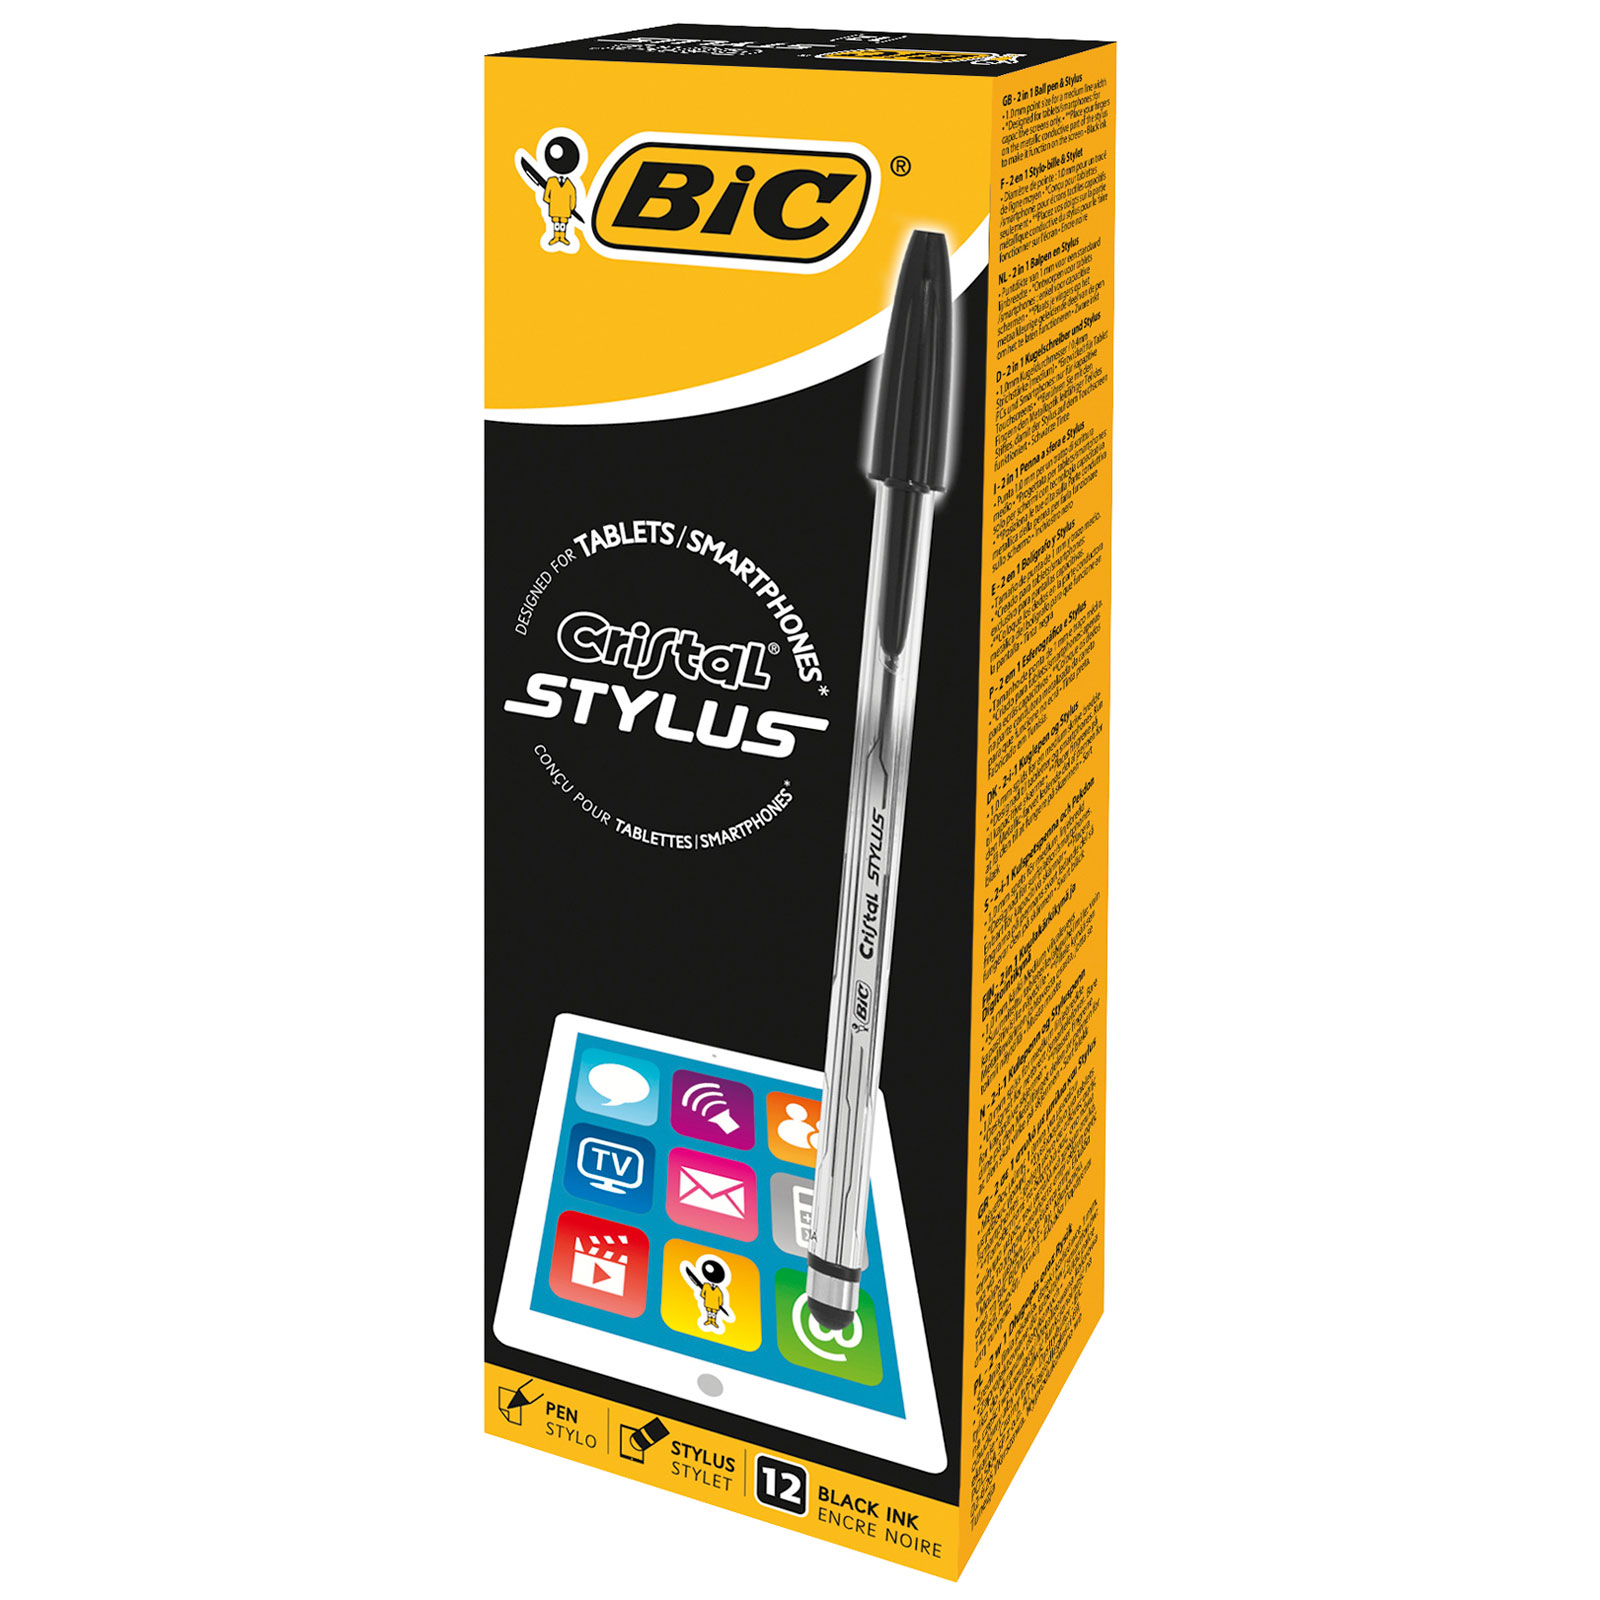 BiC Cristal Ball with Stylus | Rapid Online